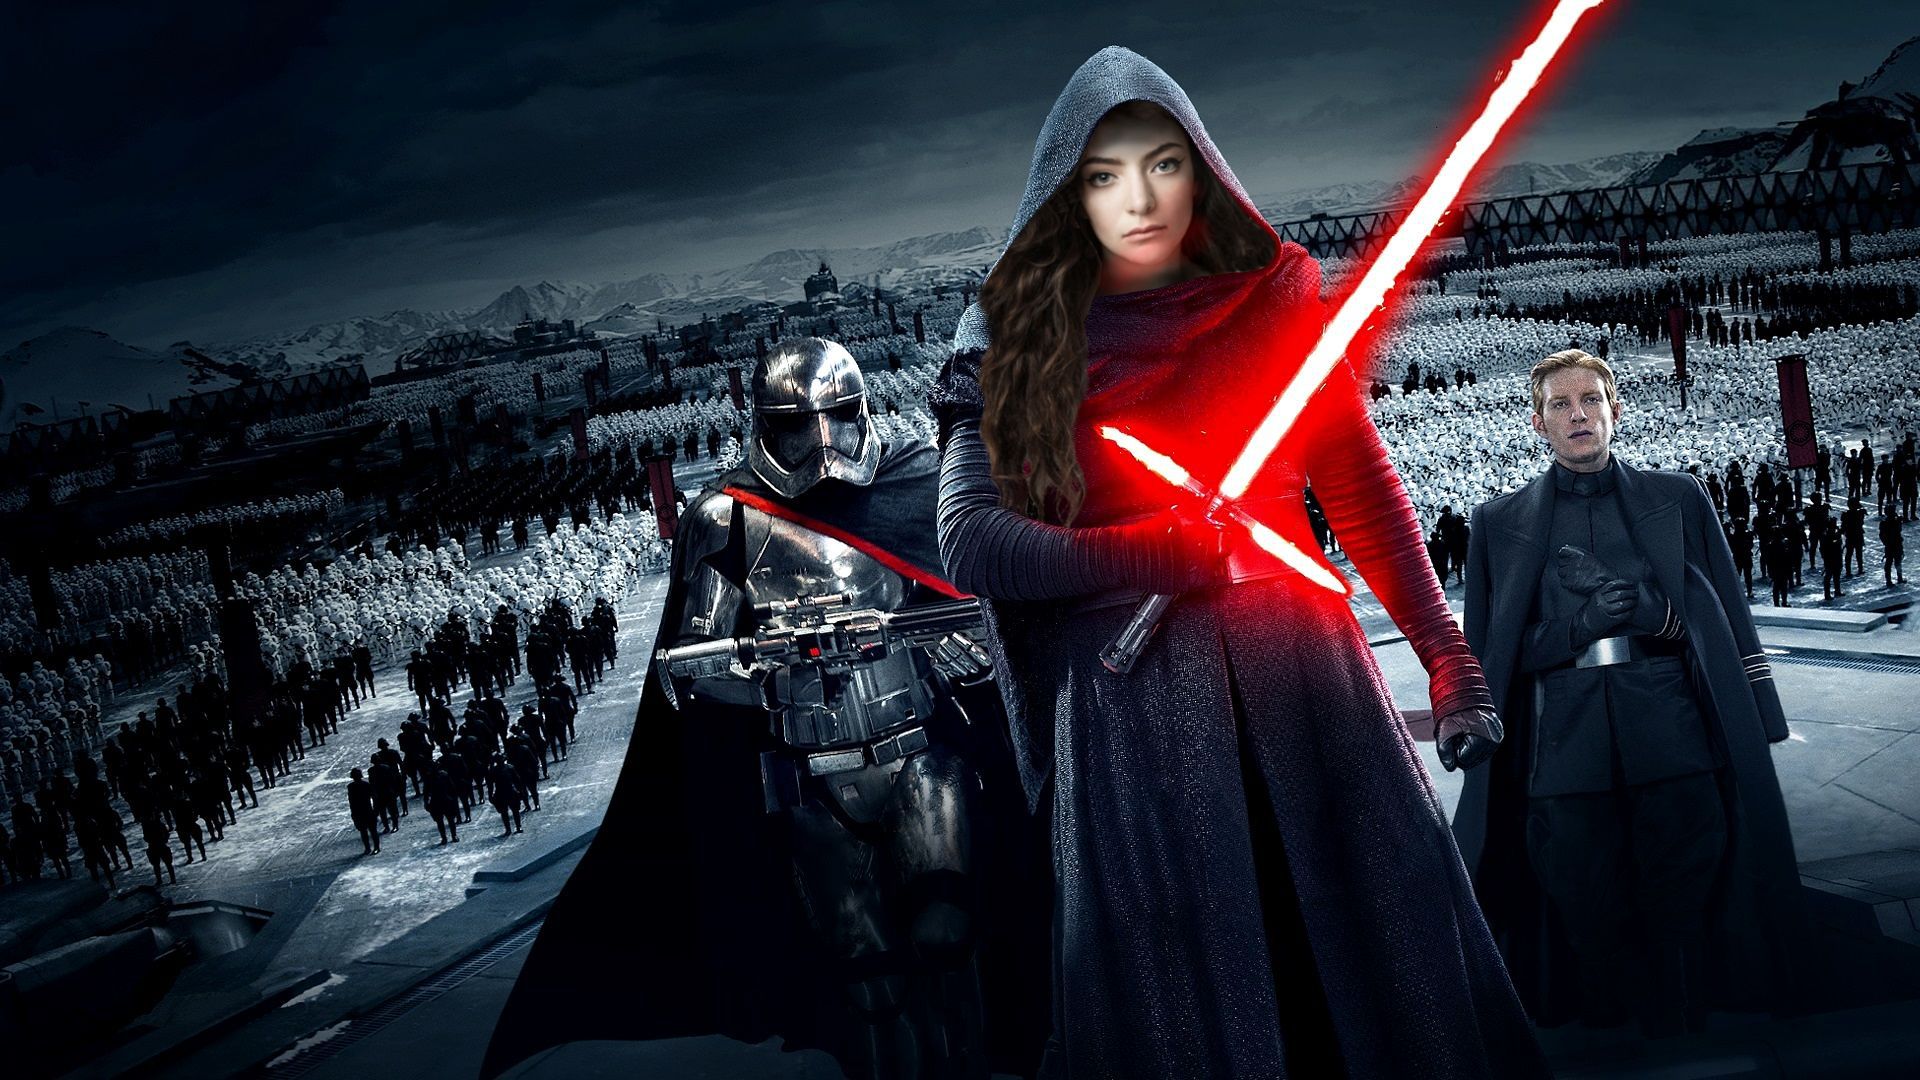 Sith Lorde